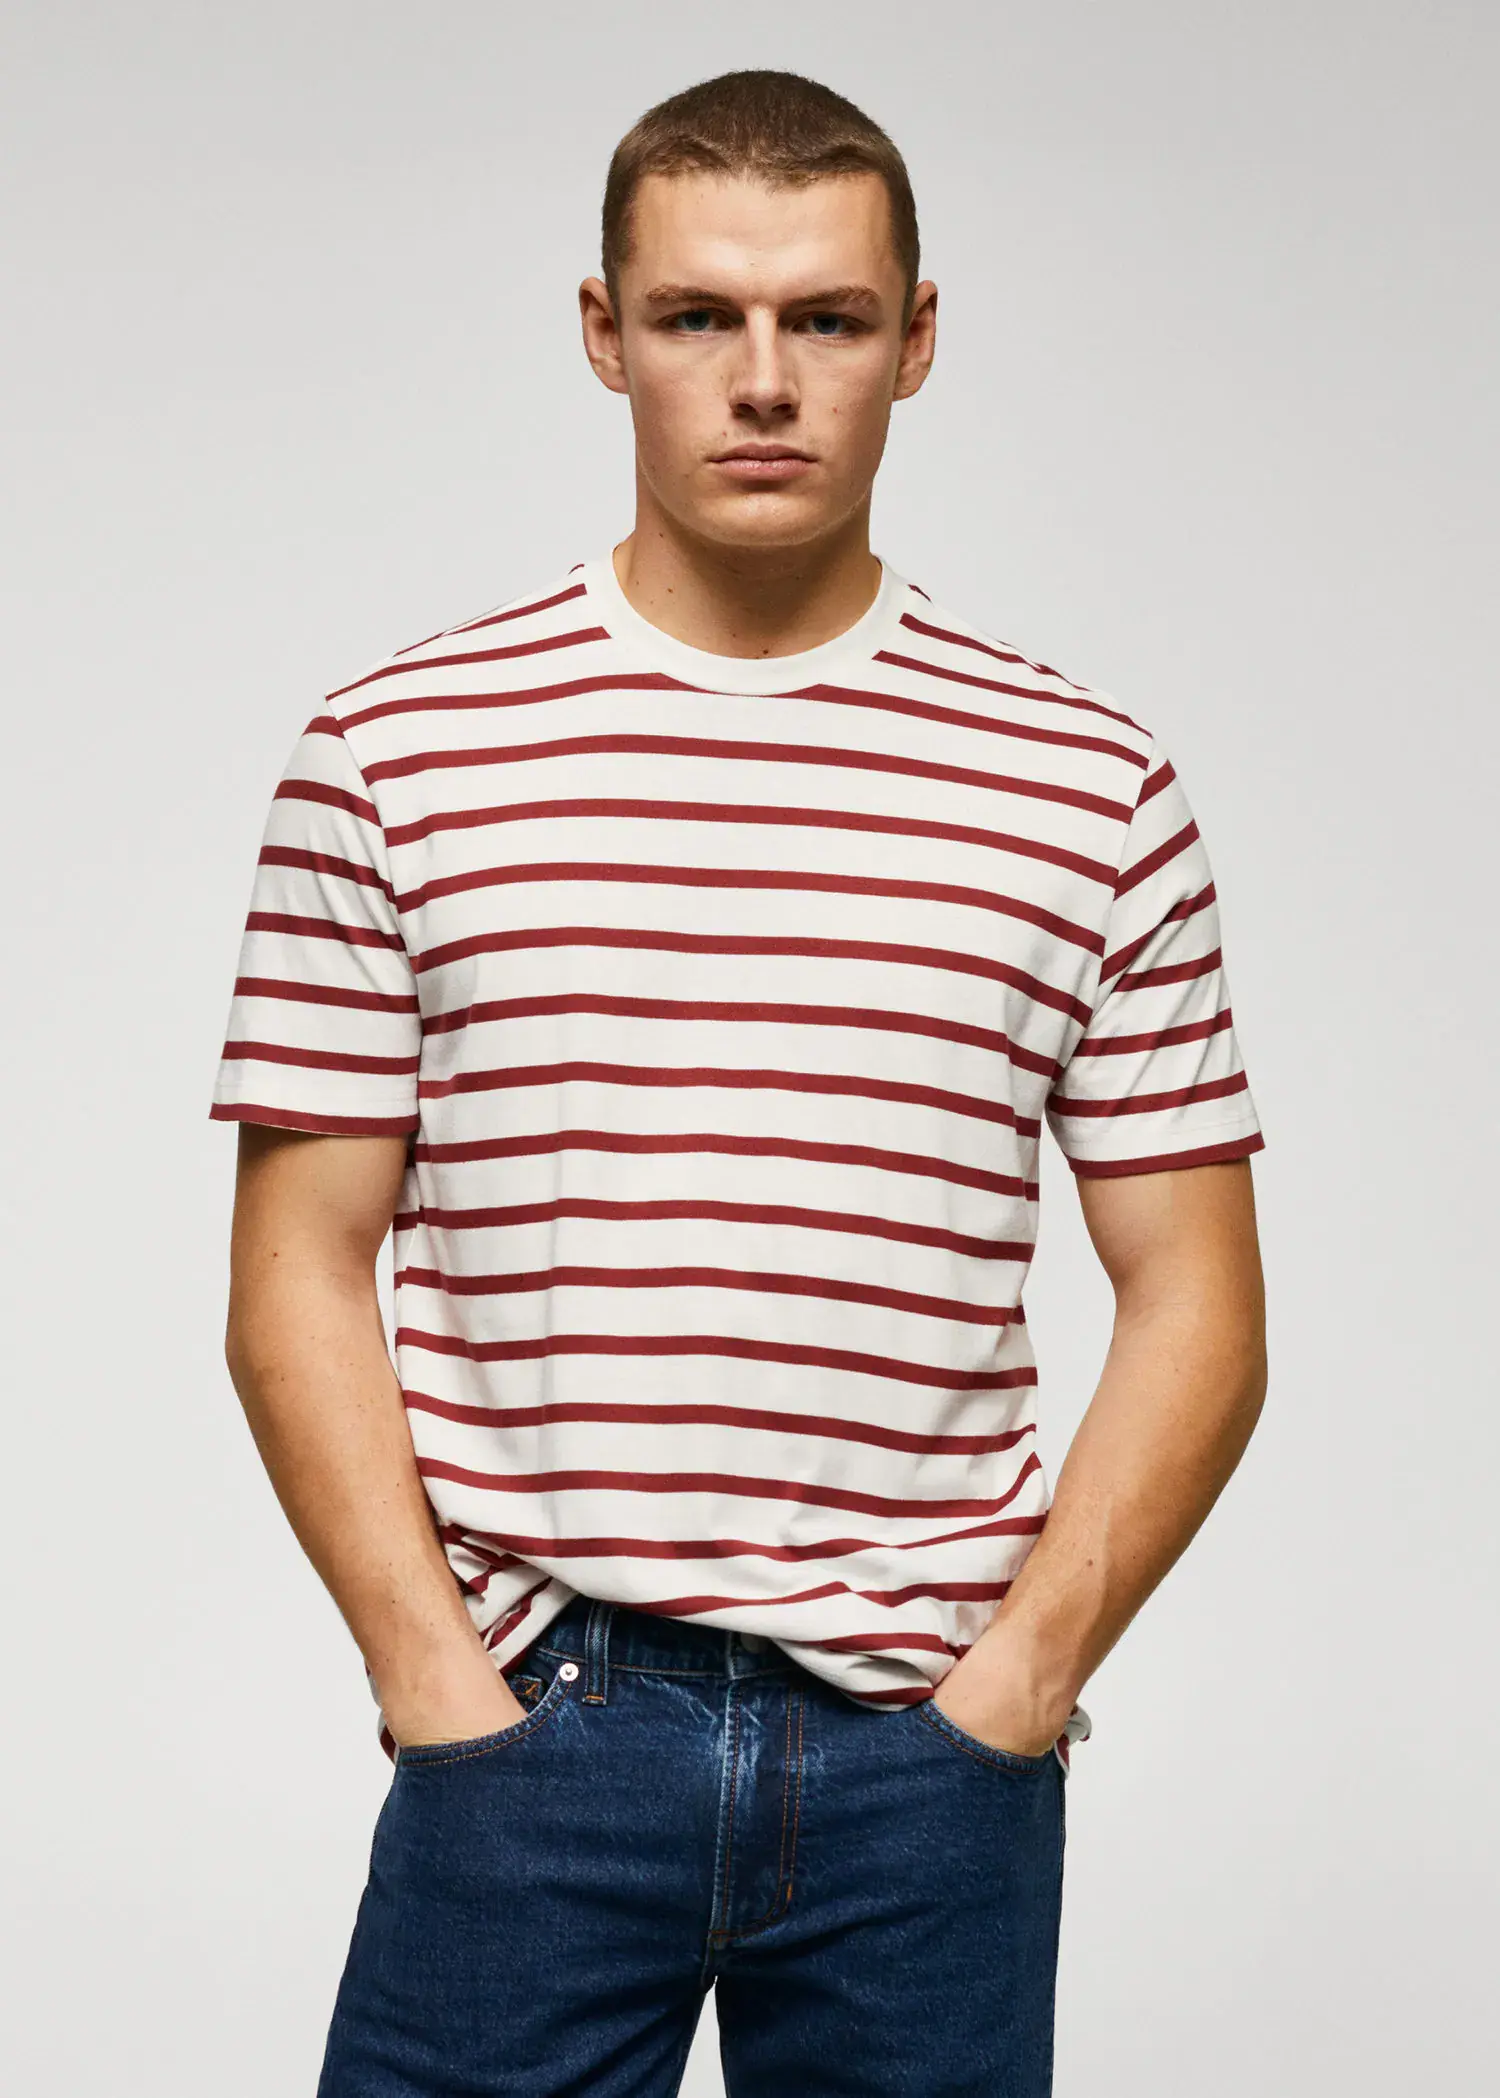 Mango Cotton-modal striped t-shirt. a young man wearing a striped t-shirt and jeans. 